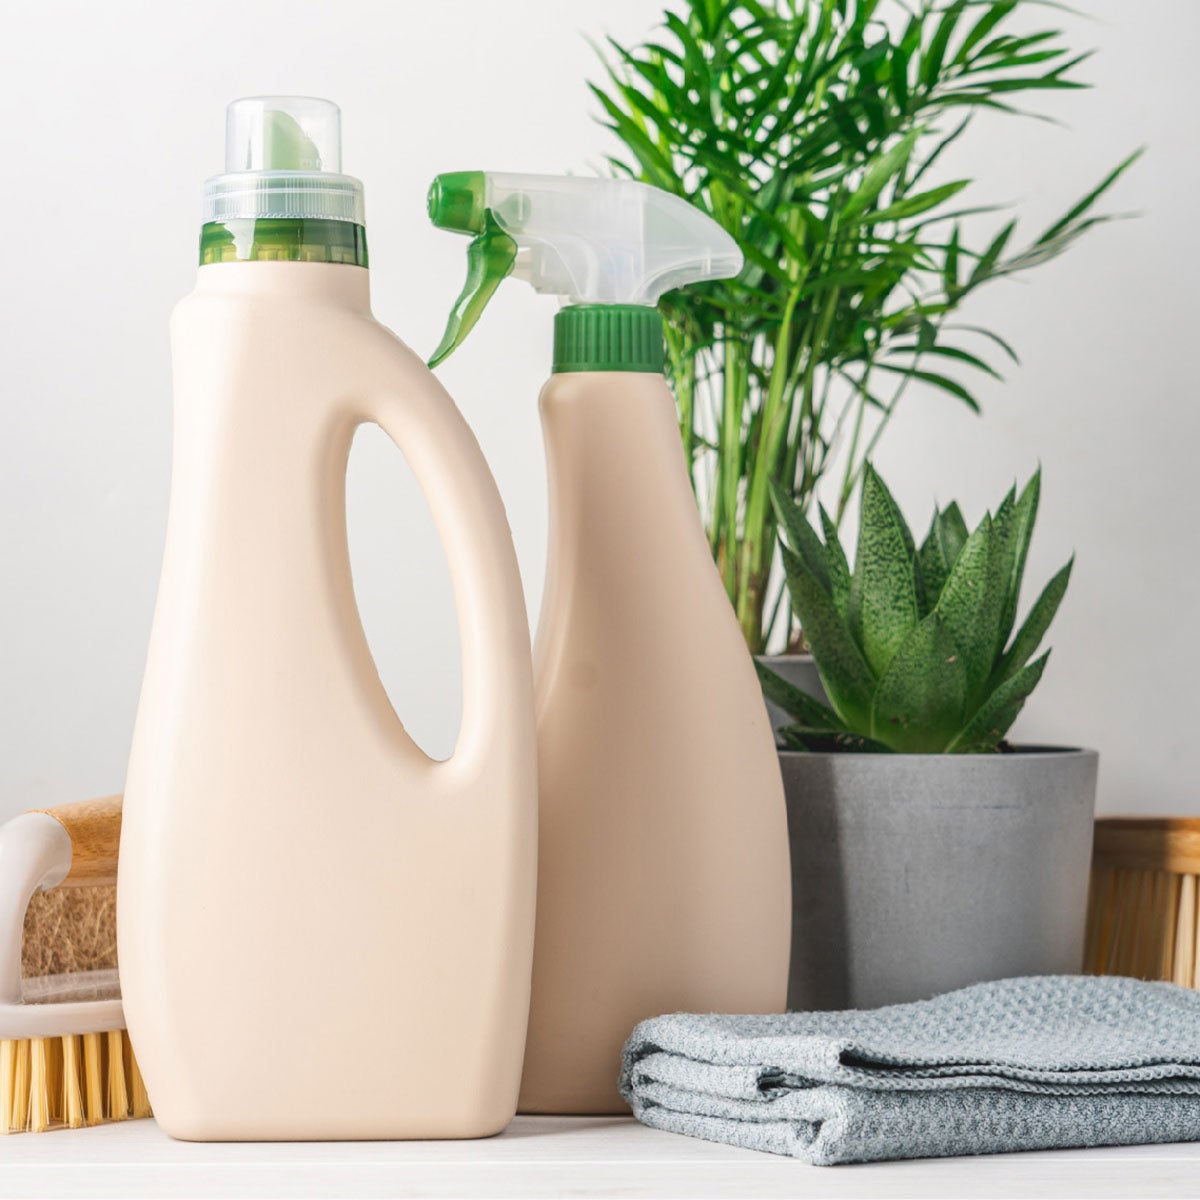 Do Natural Cleaning Products Kill Viruses and Bacteria?